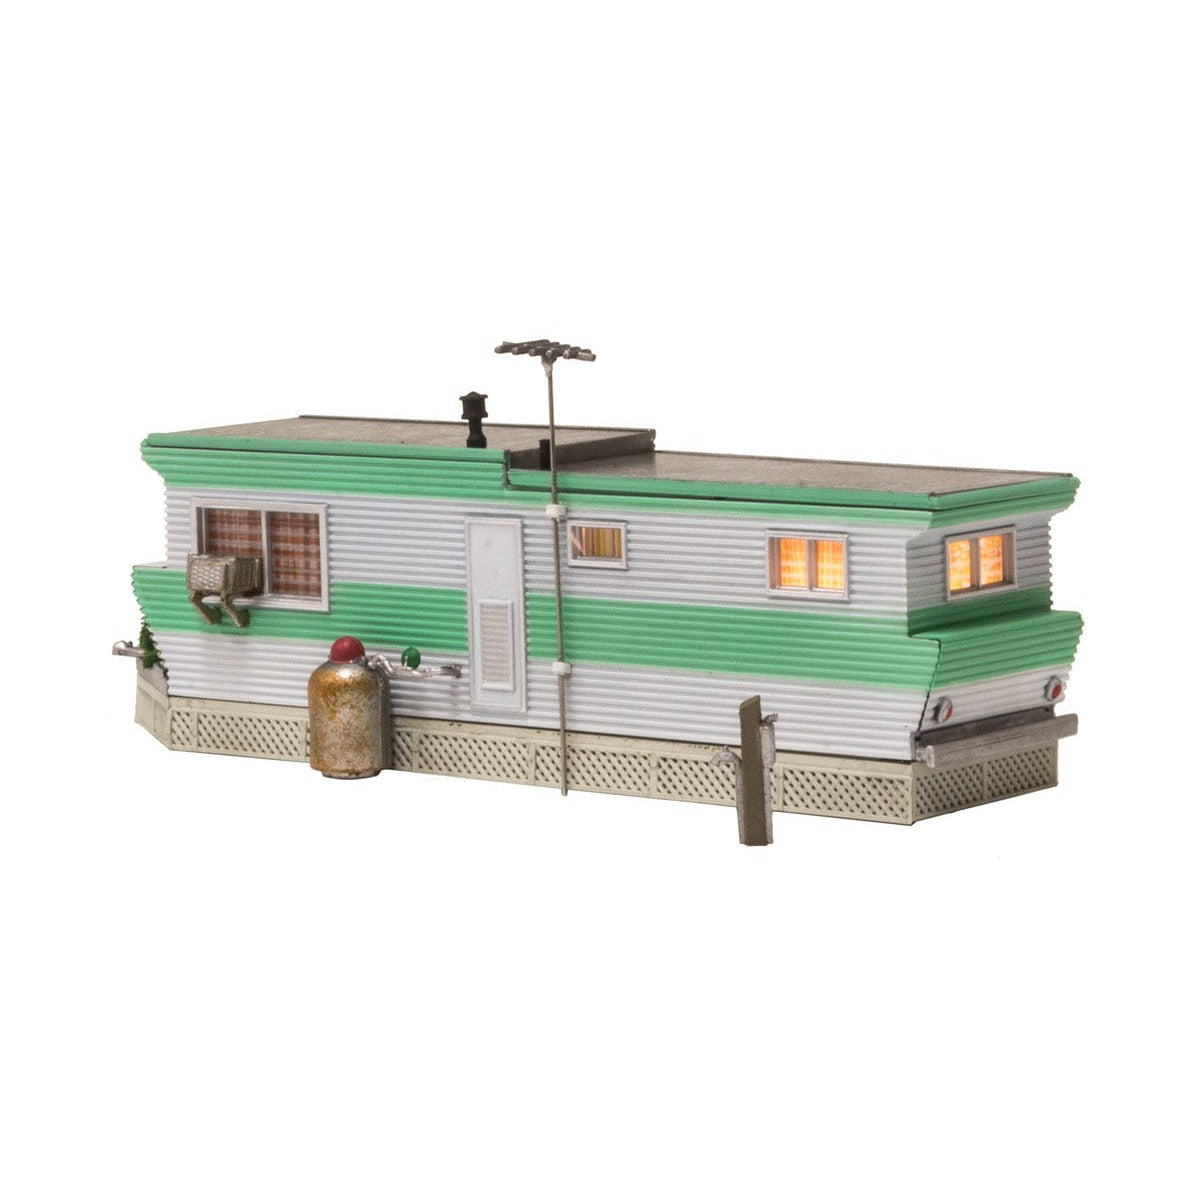 Woodland Scenics HO Scale  Grillin’ & Chillin’ Trailer Built and Ready